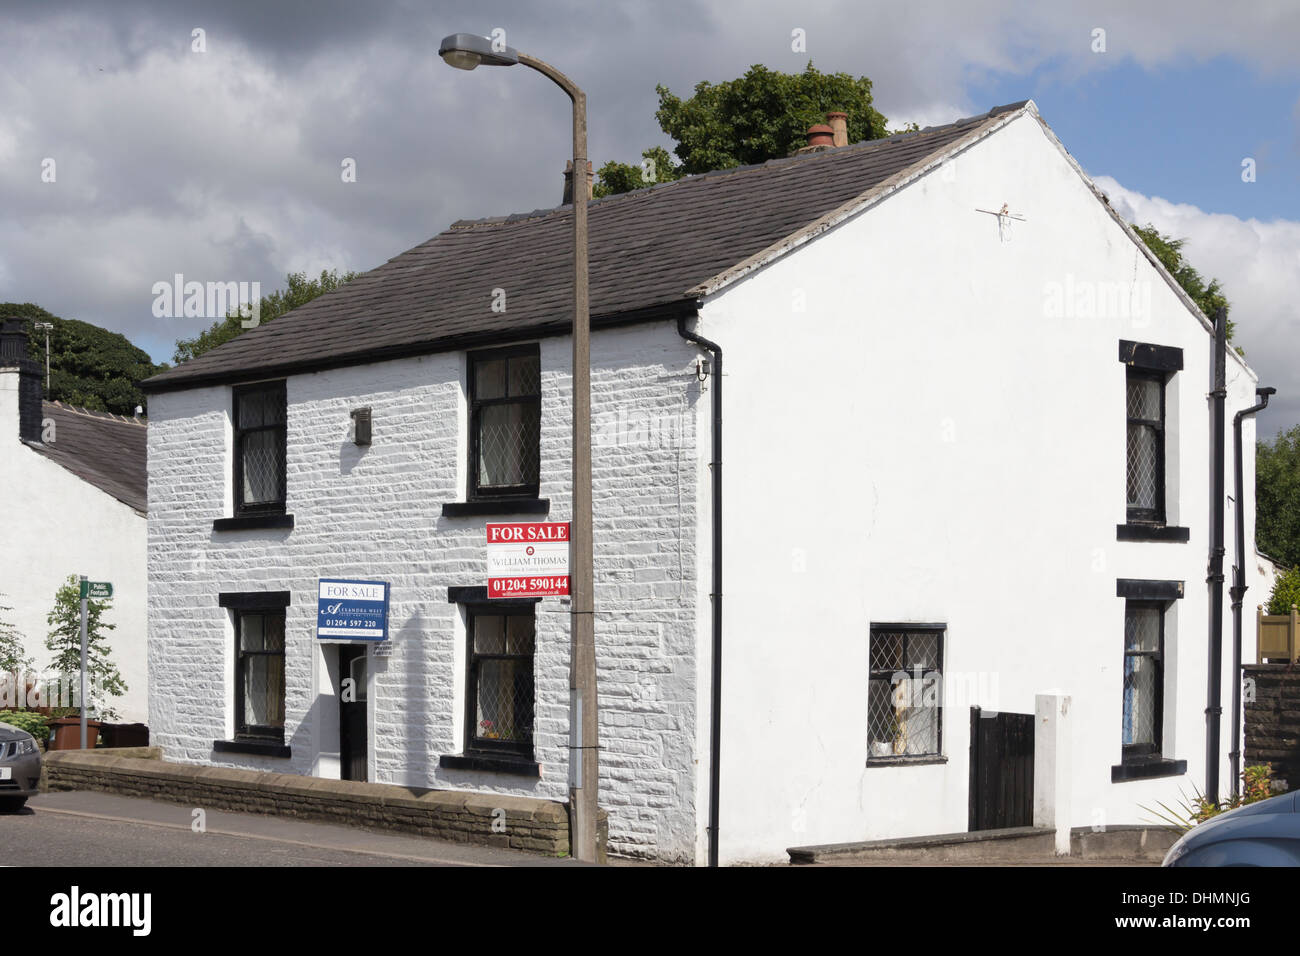 A stone-built white detached house for sale in the village of Edgworth, Turton, Lancashire. Stock Photo